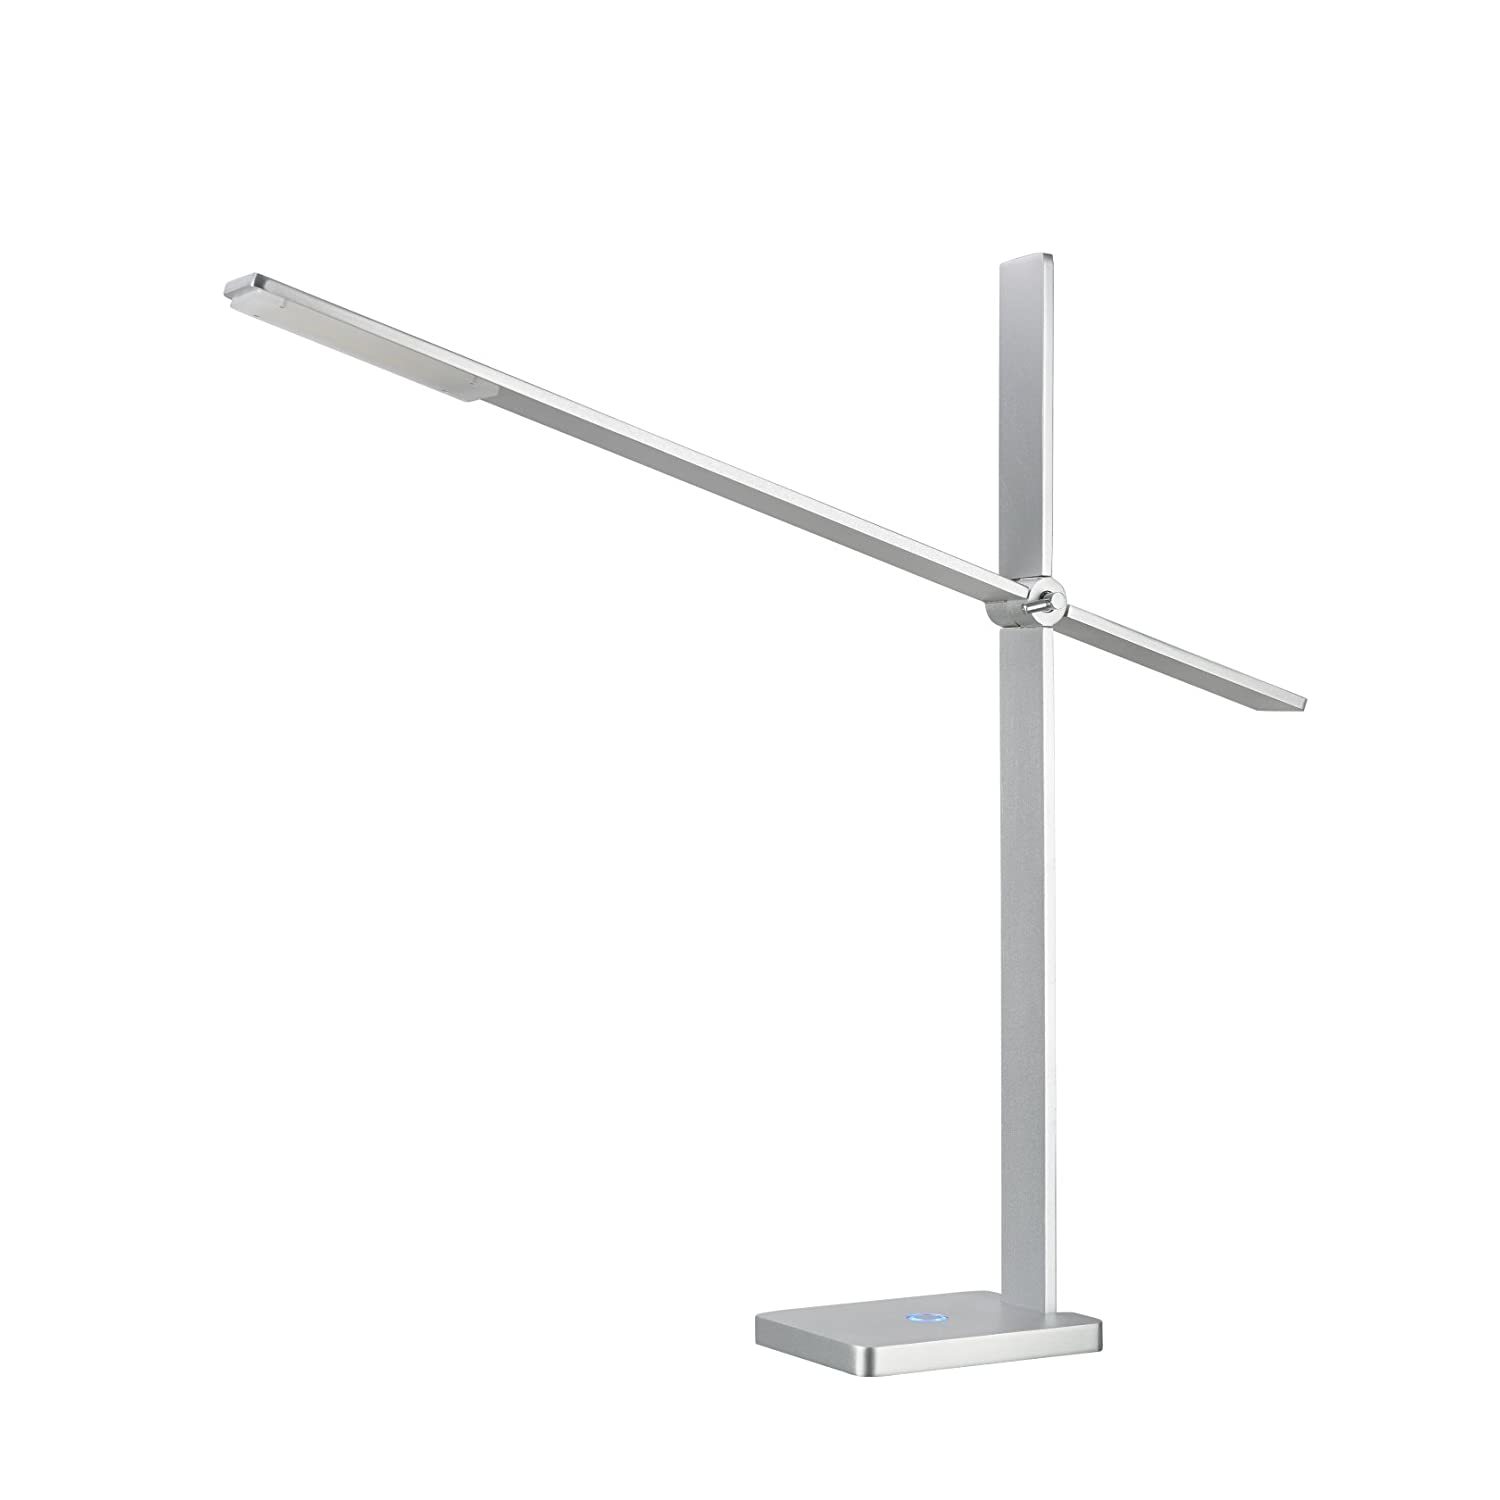 40056, Dimmable Desk Lamp, 7W Rary Design In Anodized Aluminum, 22 1/4 High